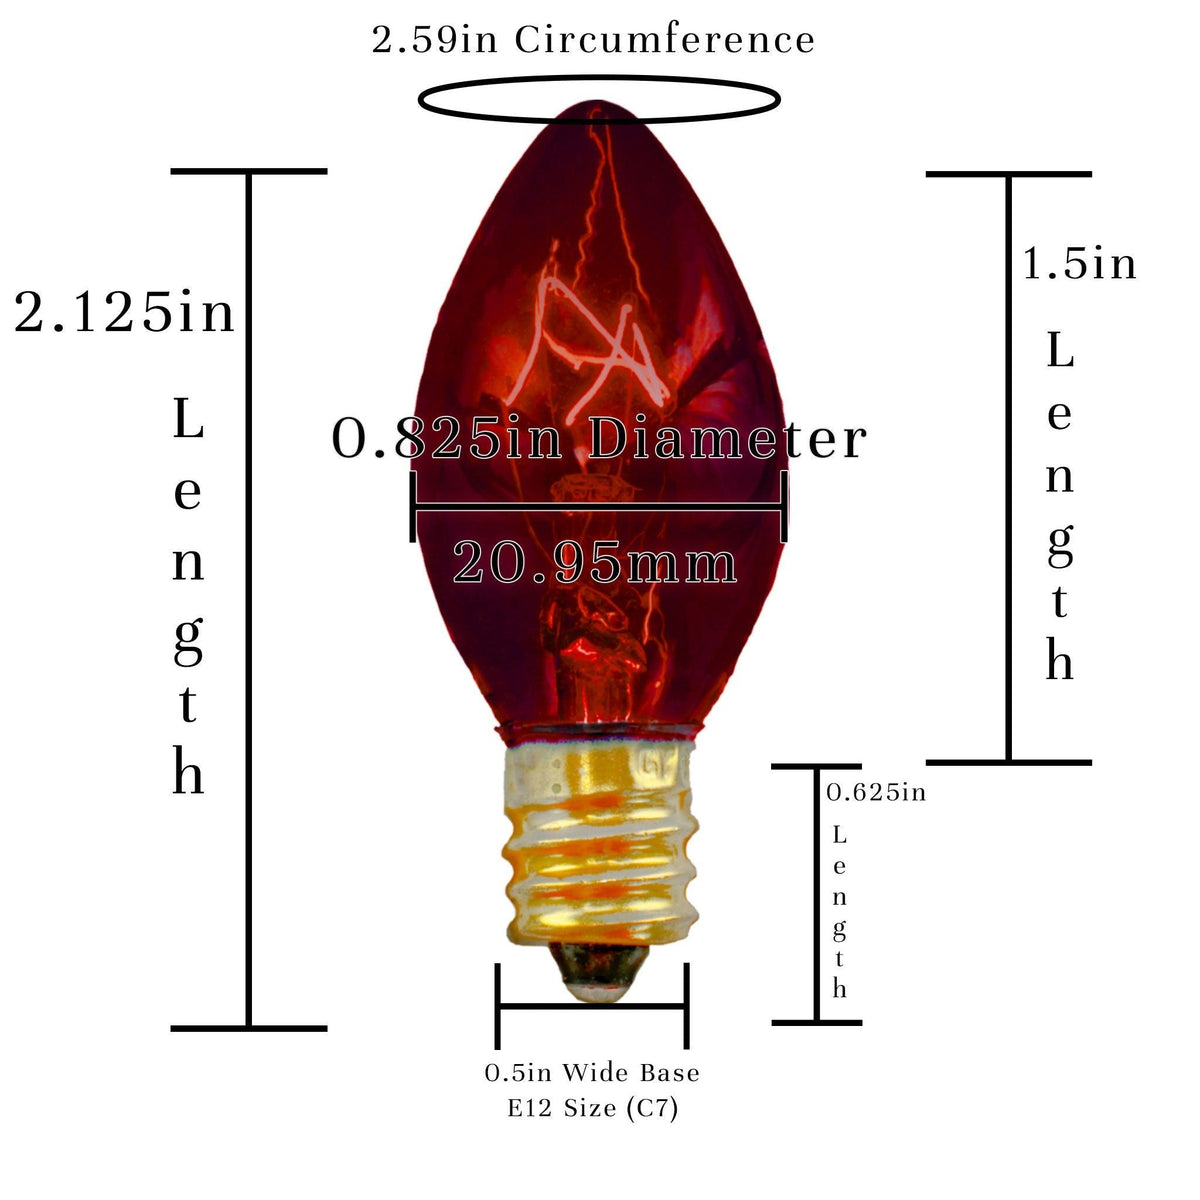 C-7 & C-9 Red Christmas Light Bulbs.  Replace your old bulbs with a set of brand new Candelabra Red Lights on sale at leedisplay.com